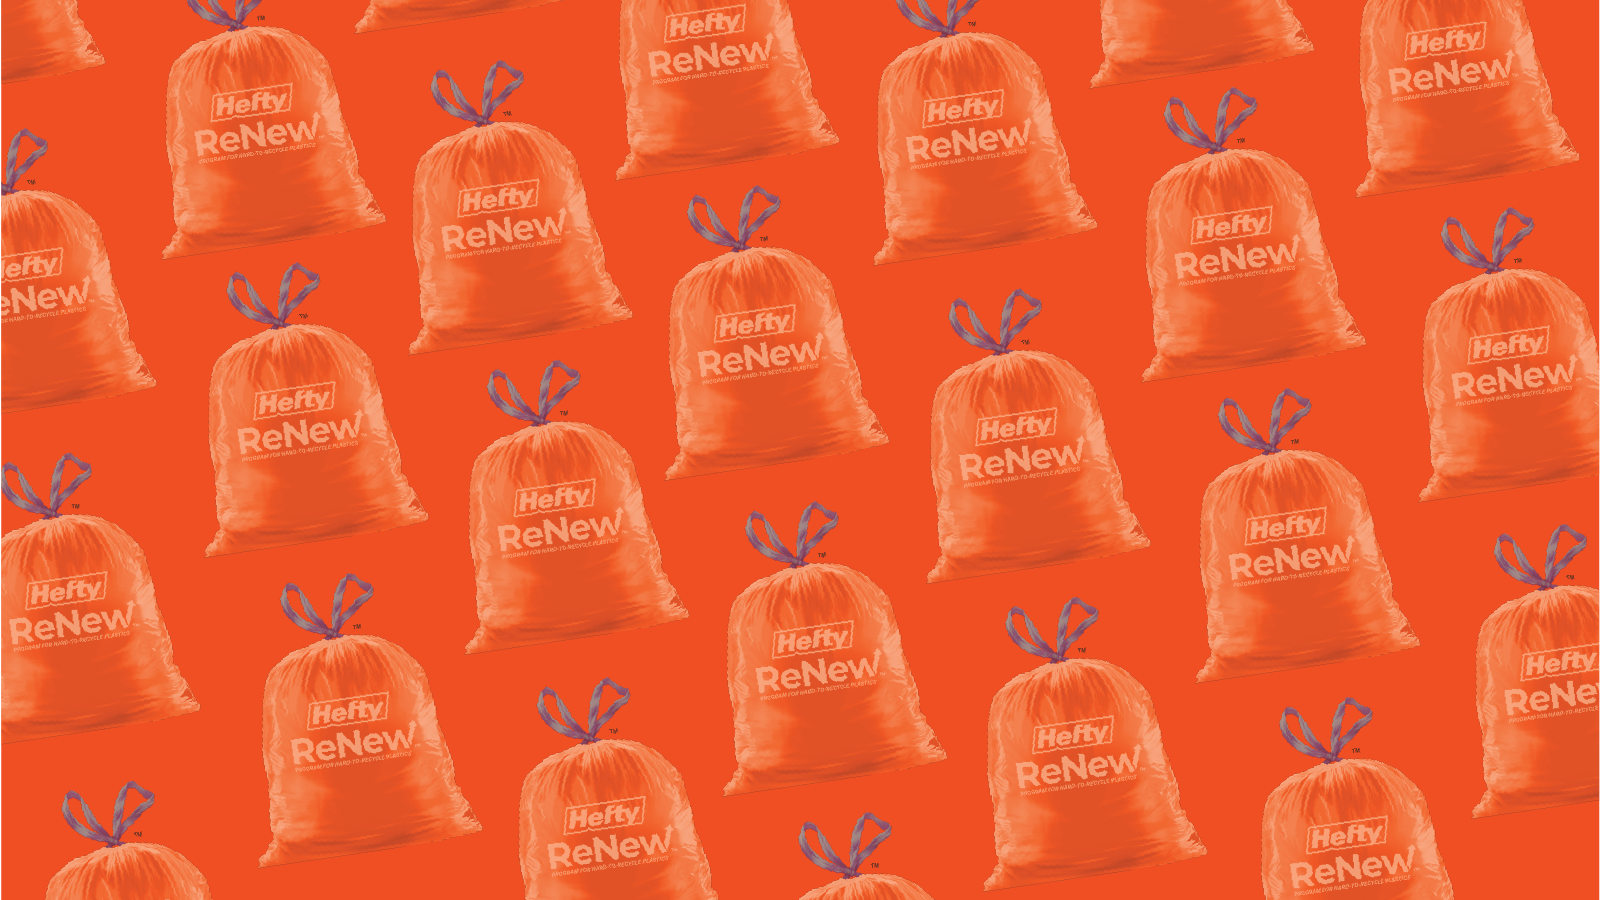 A repeating pattern of Hefty ReNew orange bags on an orange background